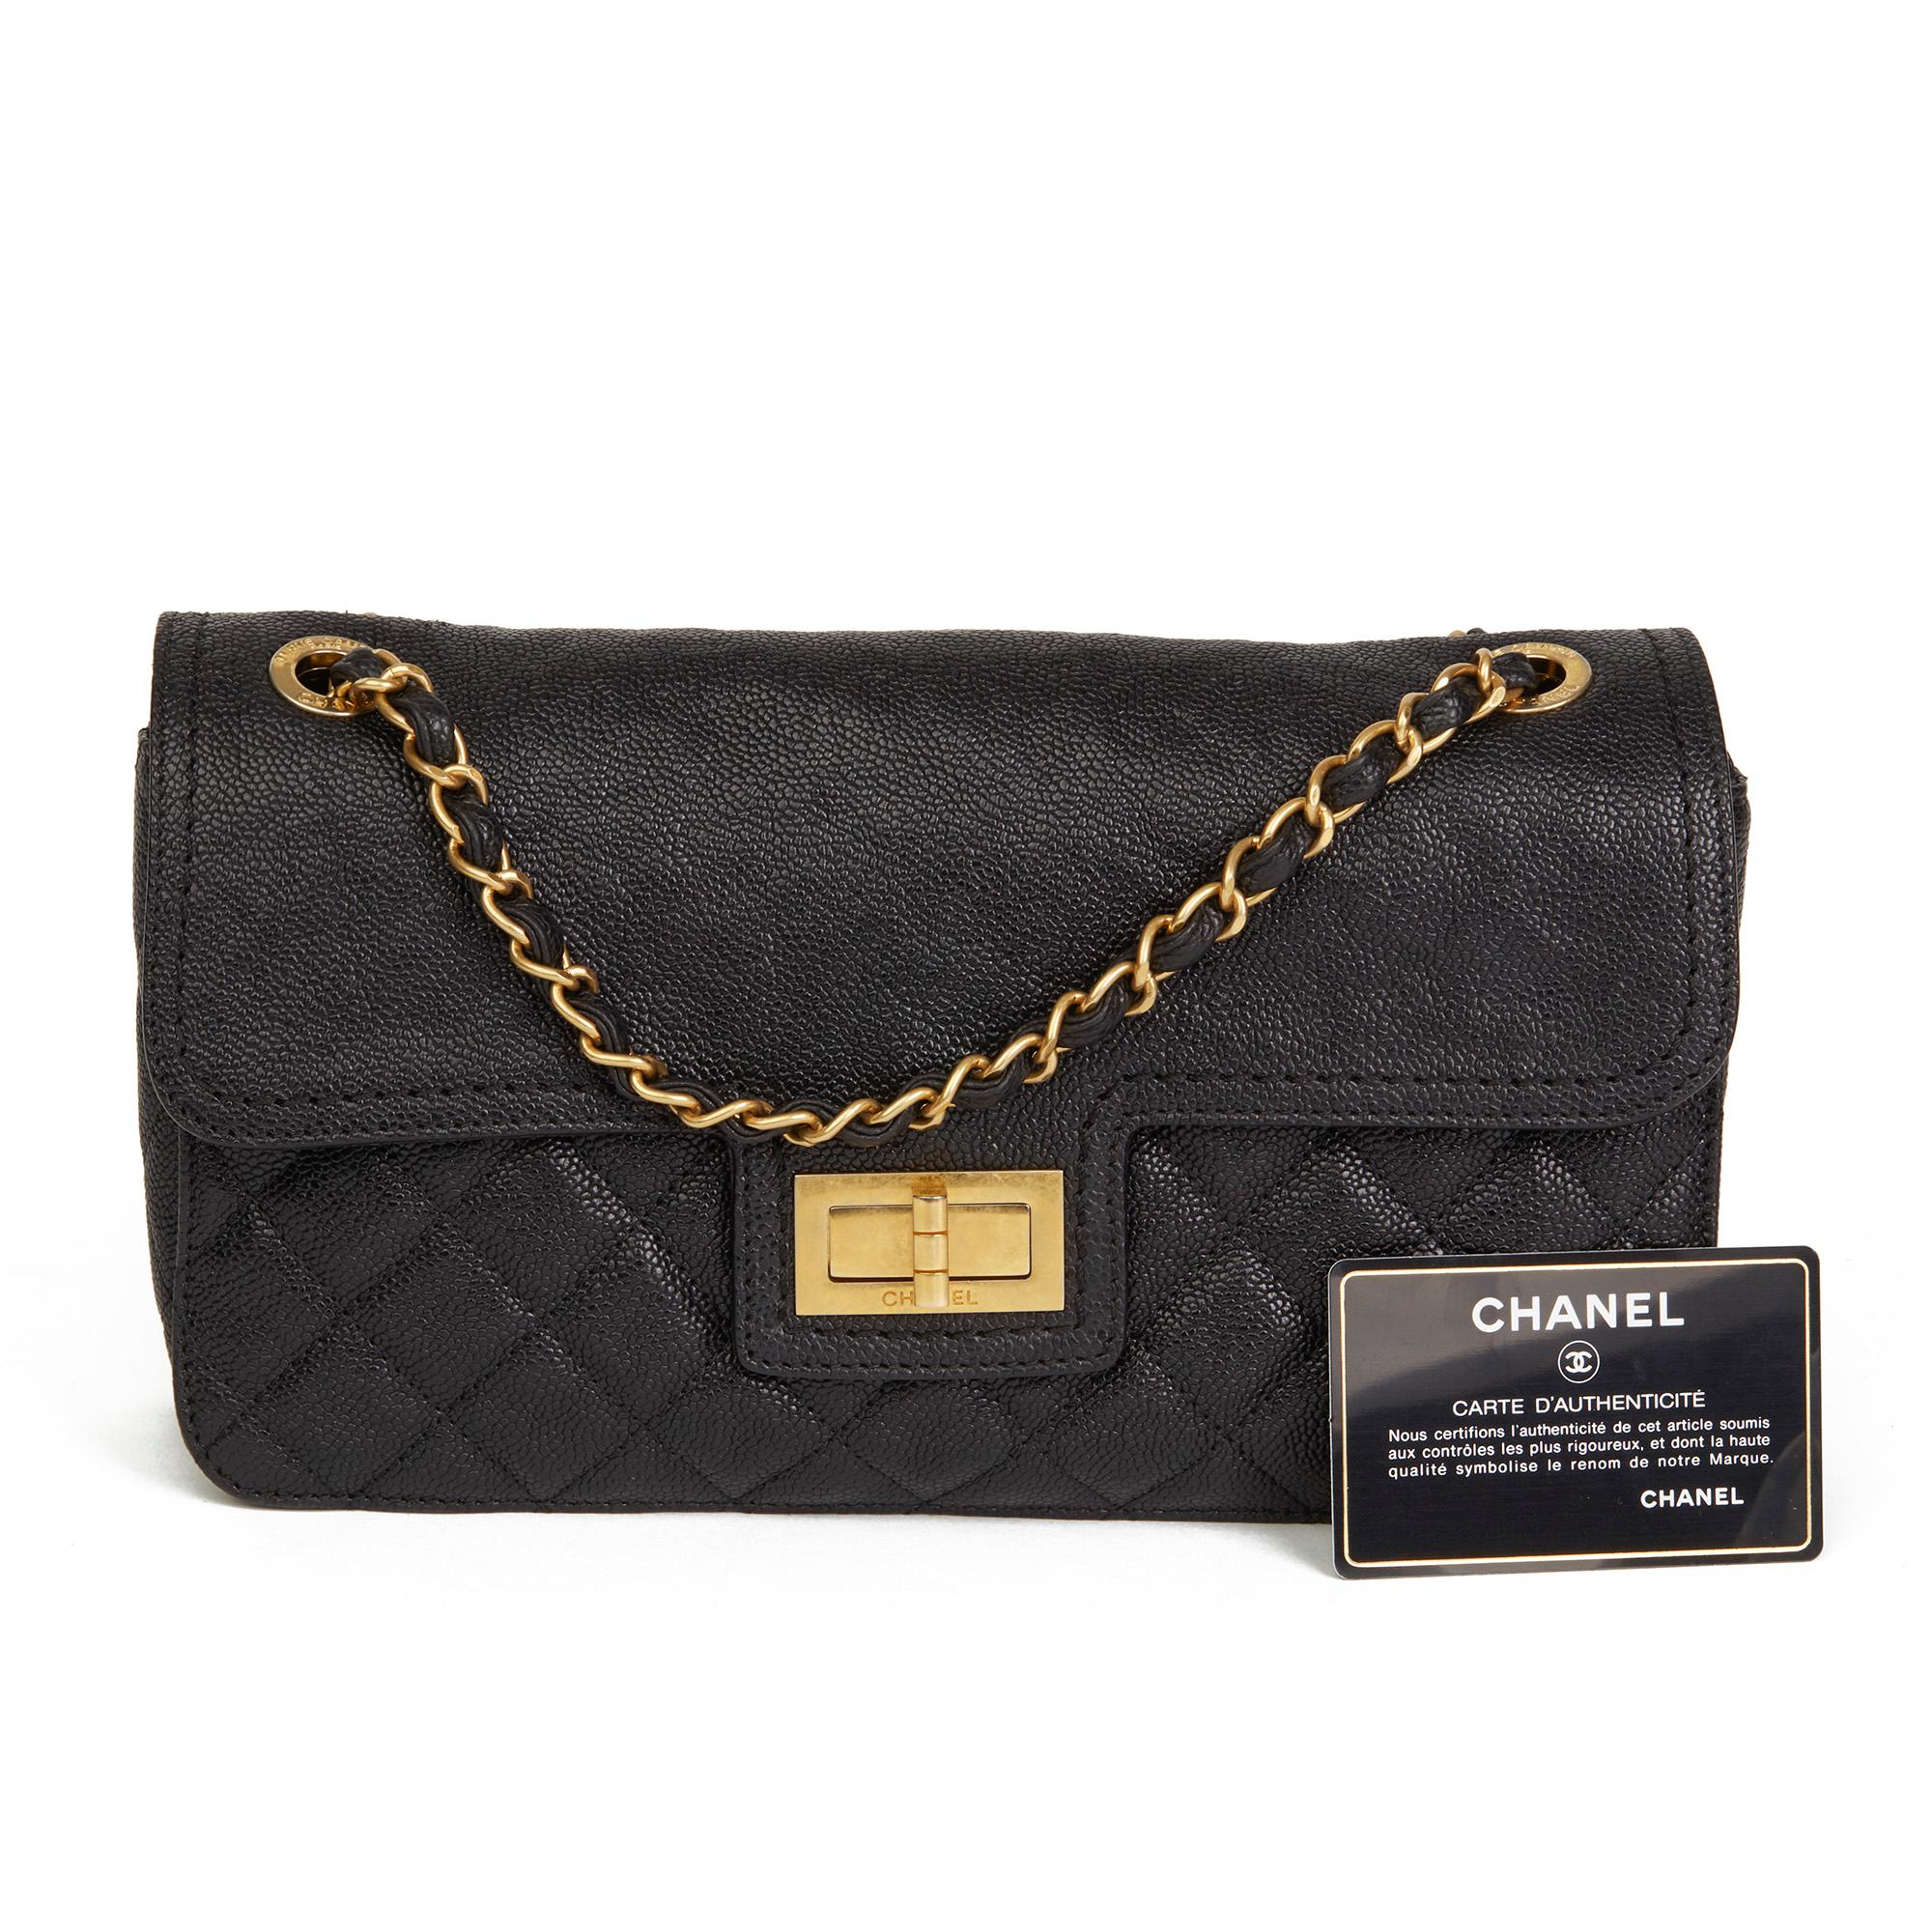 2012 Chanel Black Quilted Caviar Leather 2.55 Reissue Classic Single Flap Bag 7